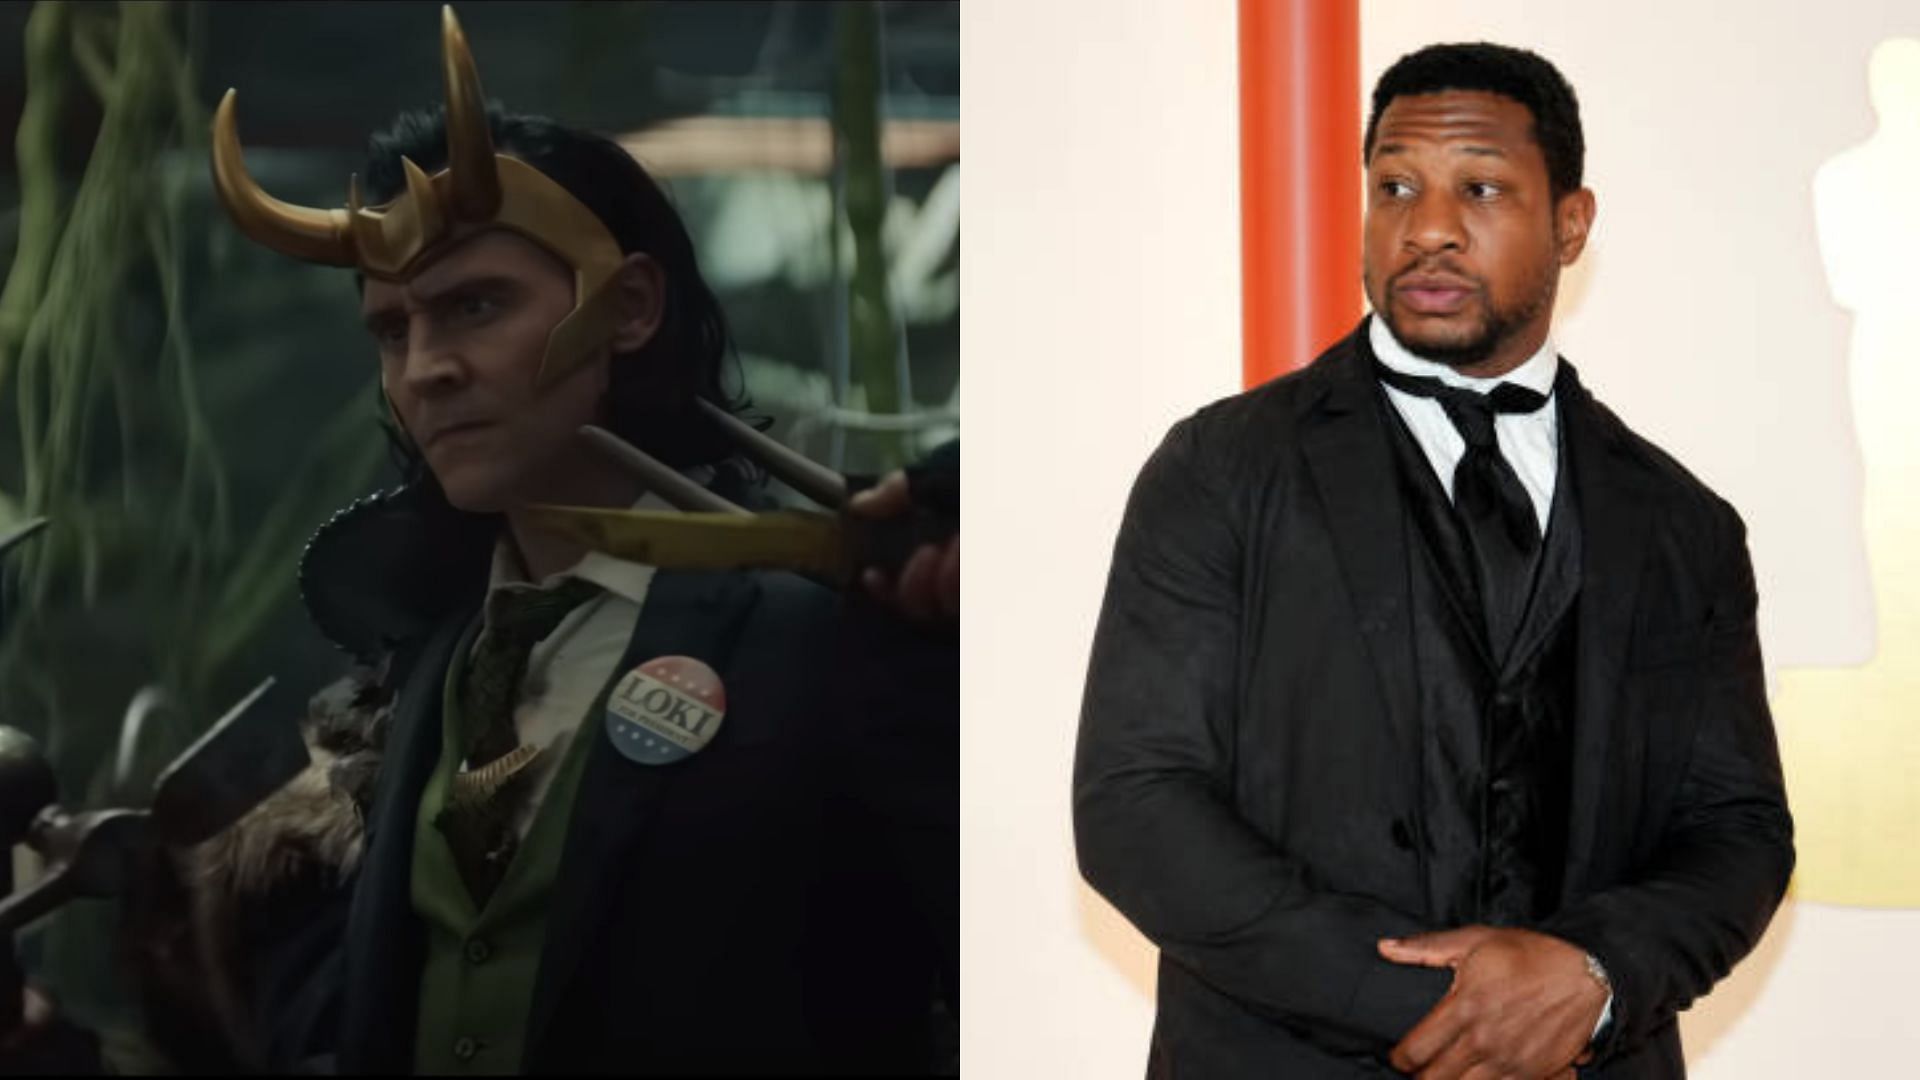 The Loki Season 2 Trailer Hints at How the MCU Can Solve its Kang Problem